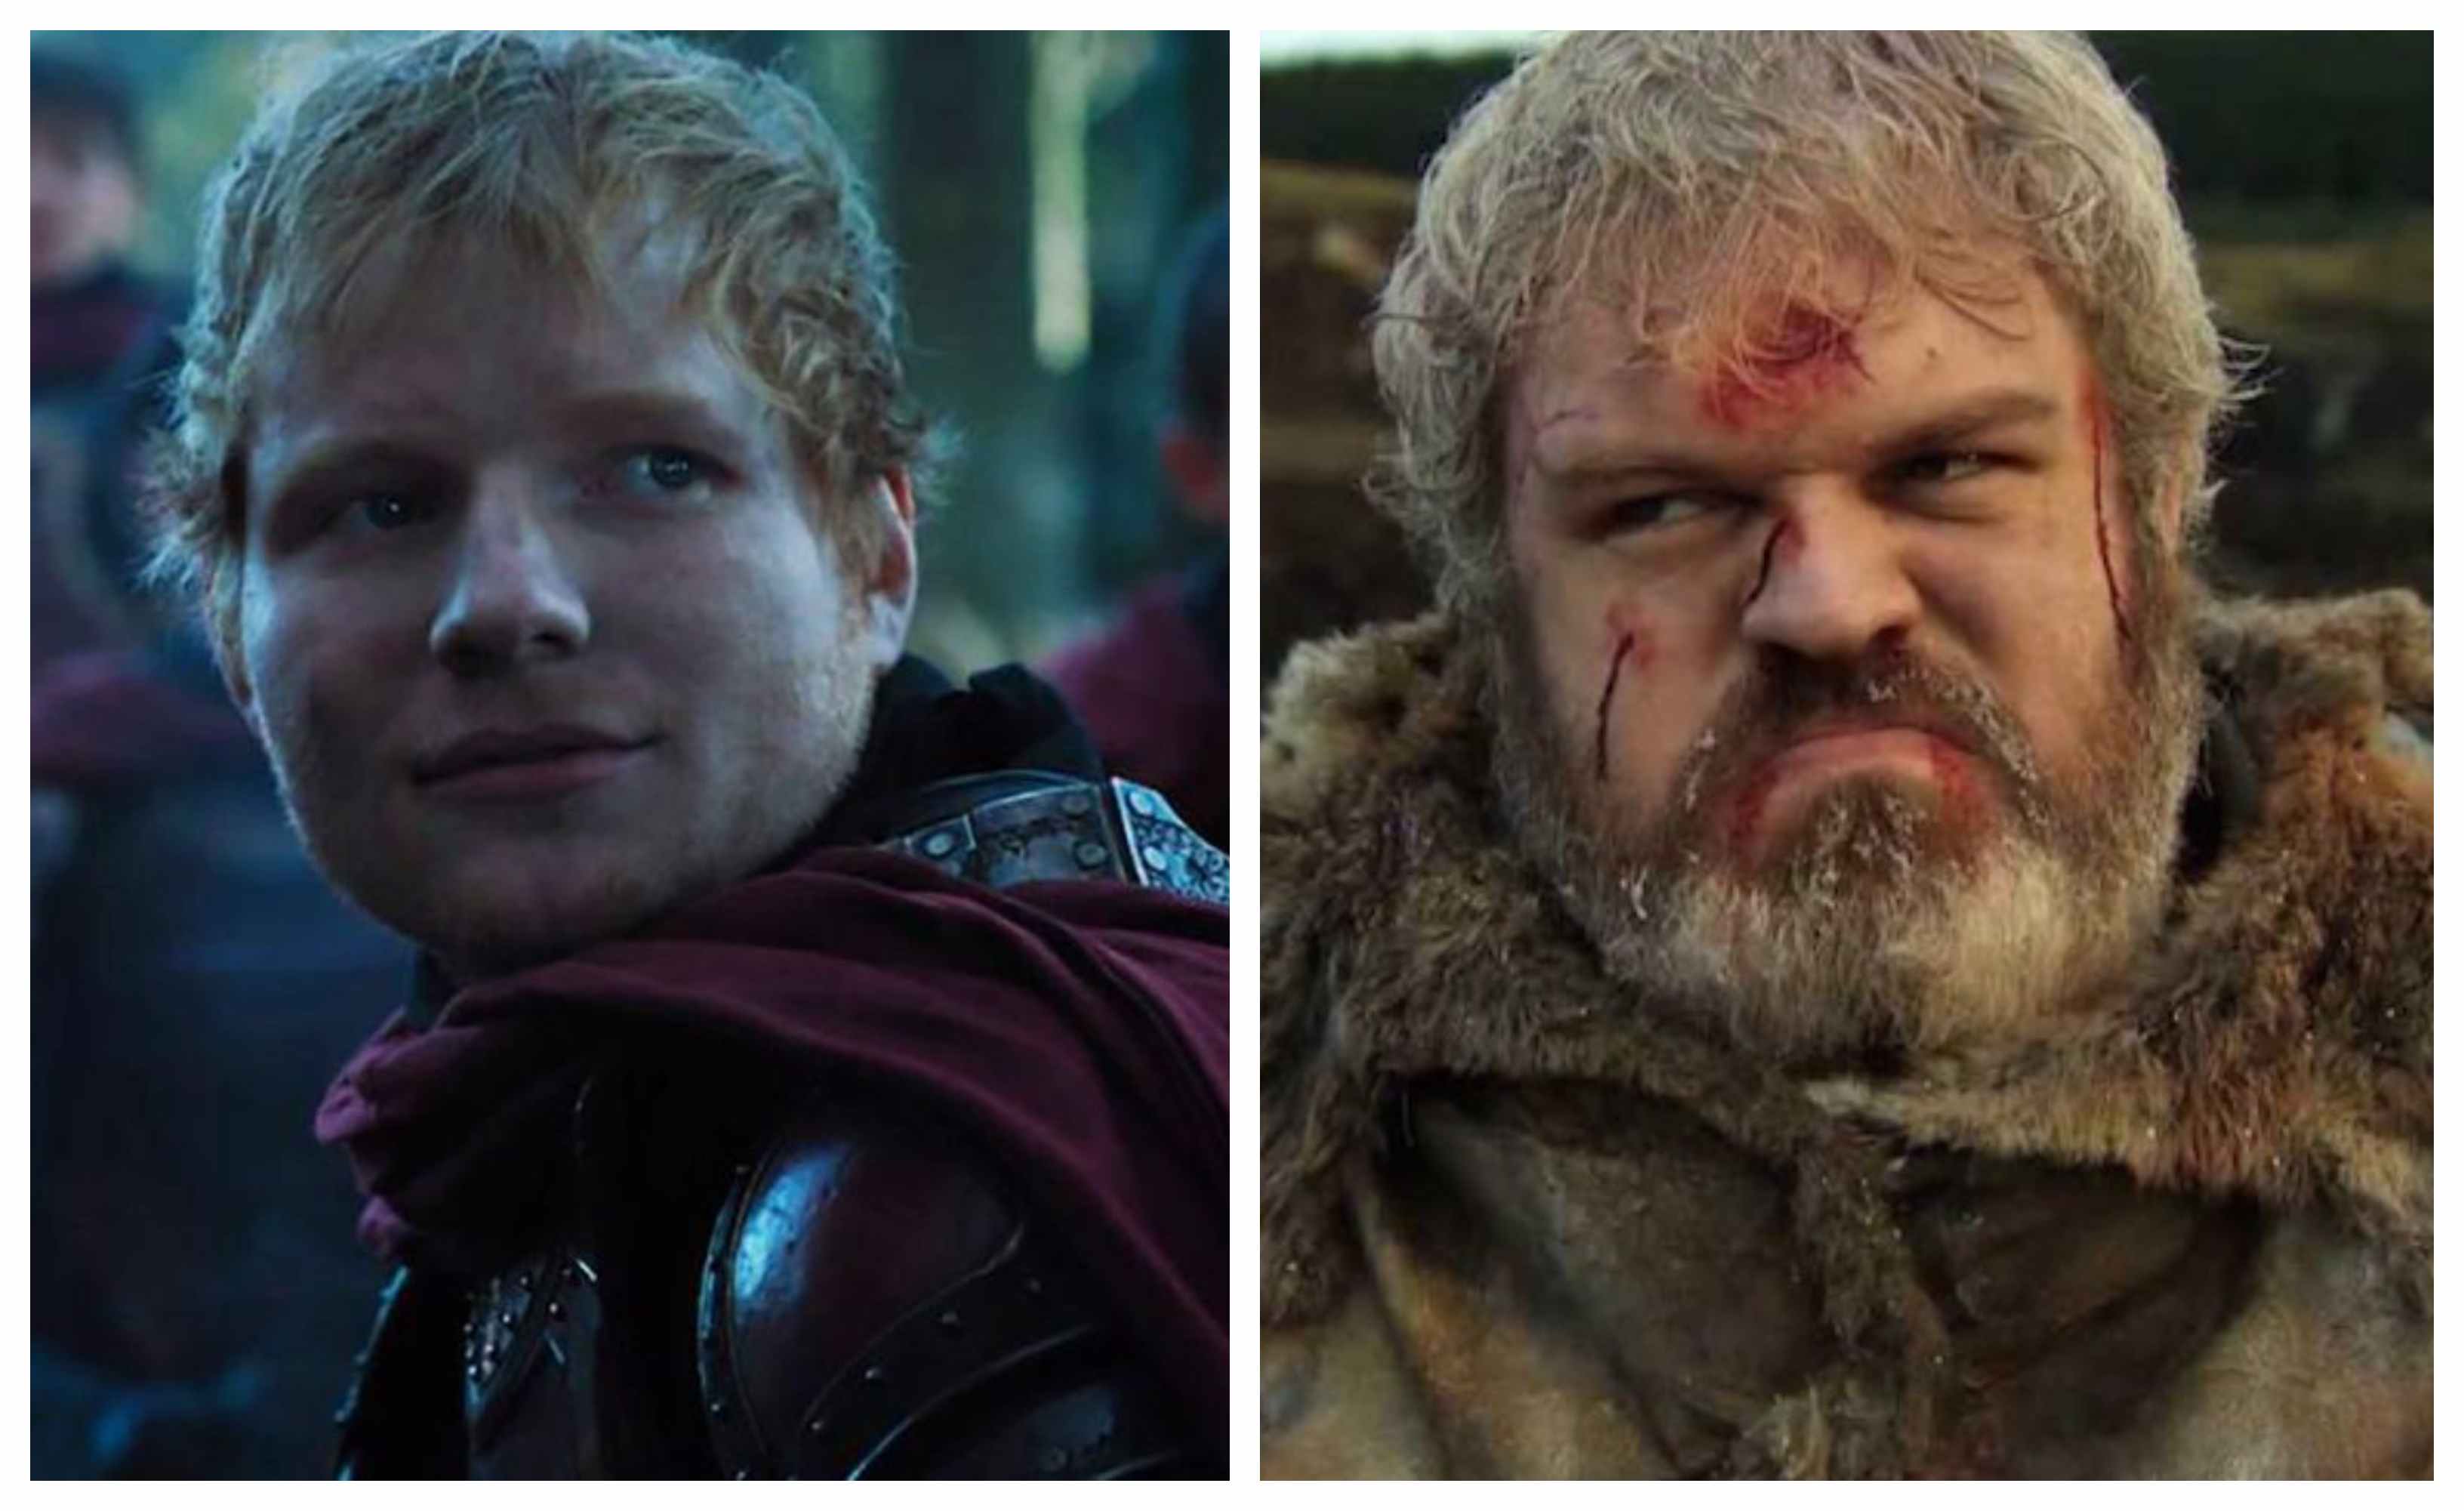 Turns Out Hodor Wasn’t Into Ed Sheeran’s ‘Game of Thrones’ Cameo Either